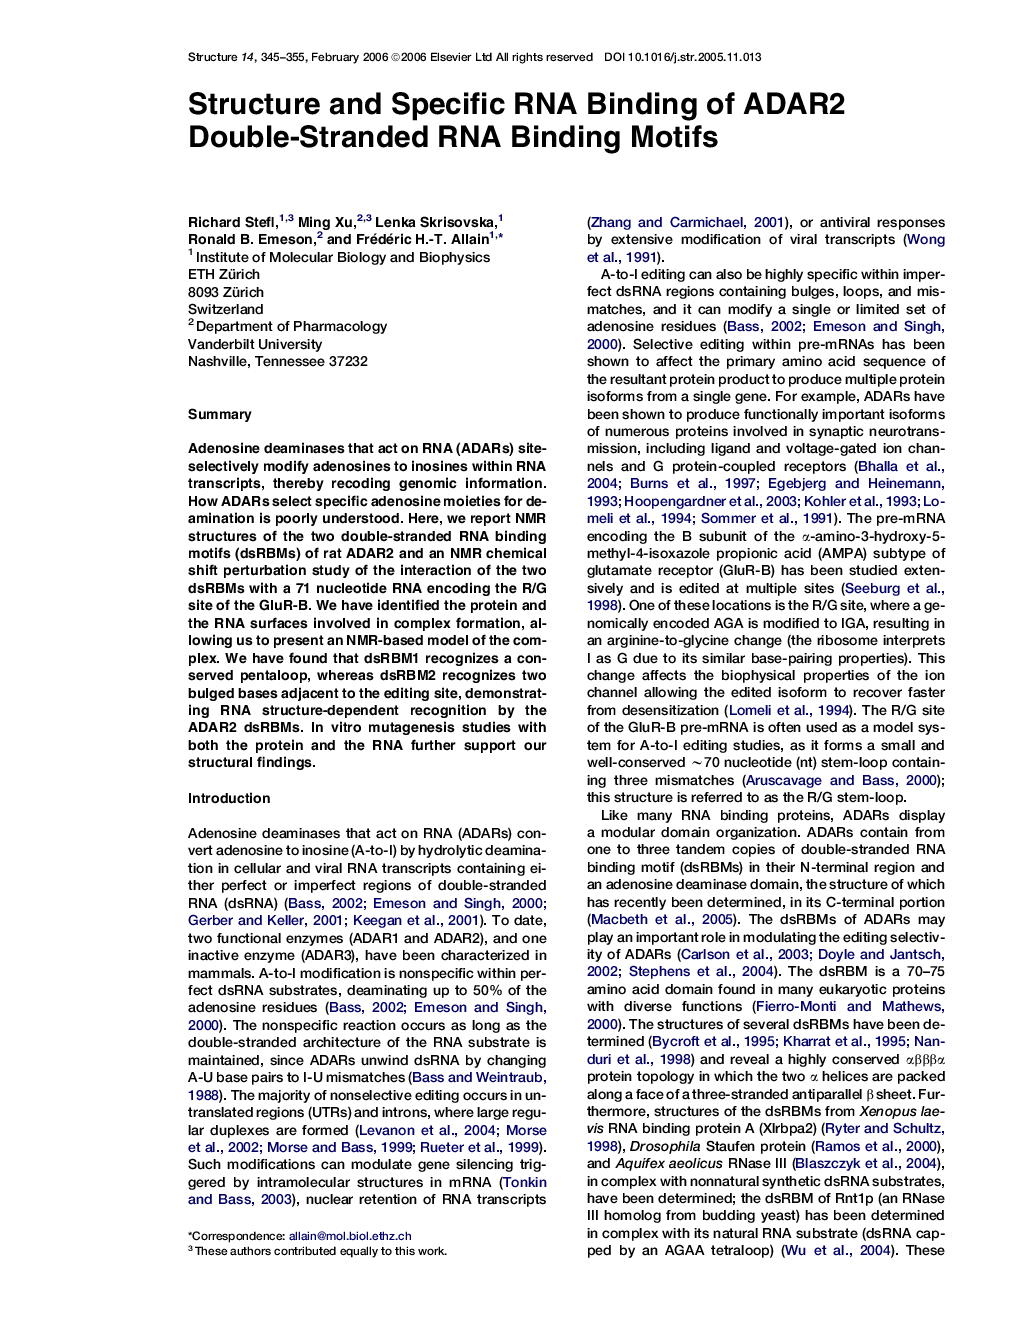 Structure and Specific RNA Binding of ADAR2 Double-Stranded RNA Binding Motifs